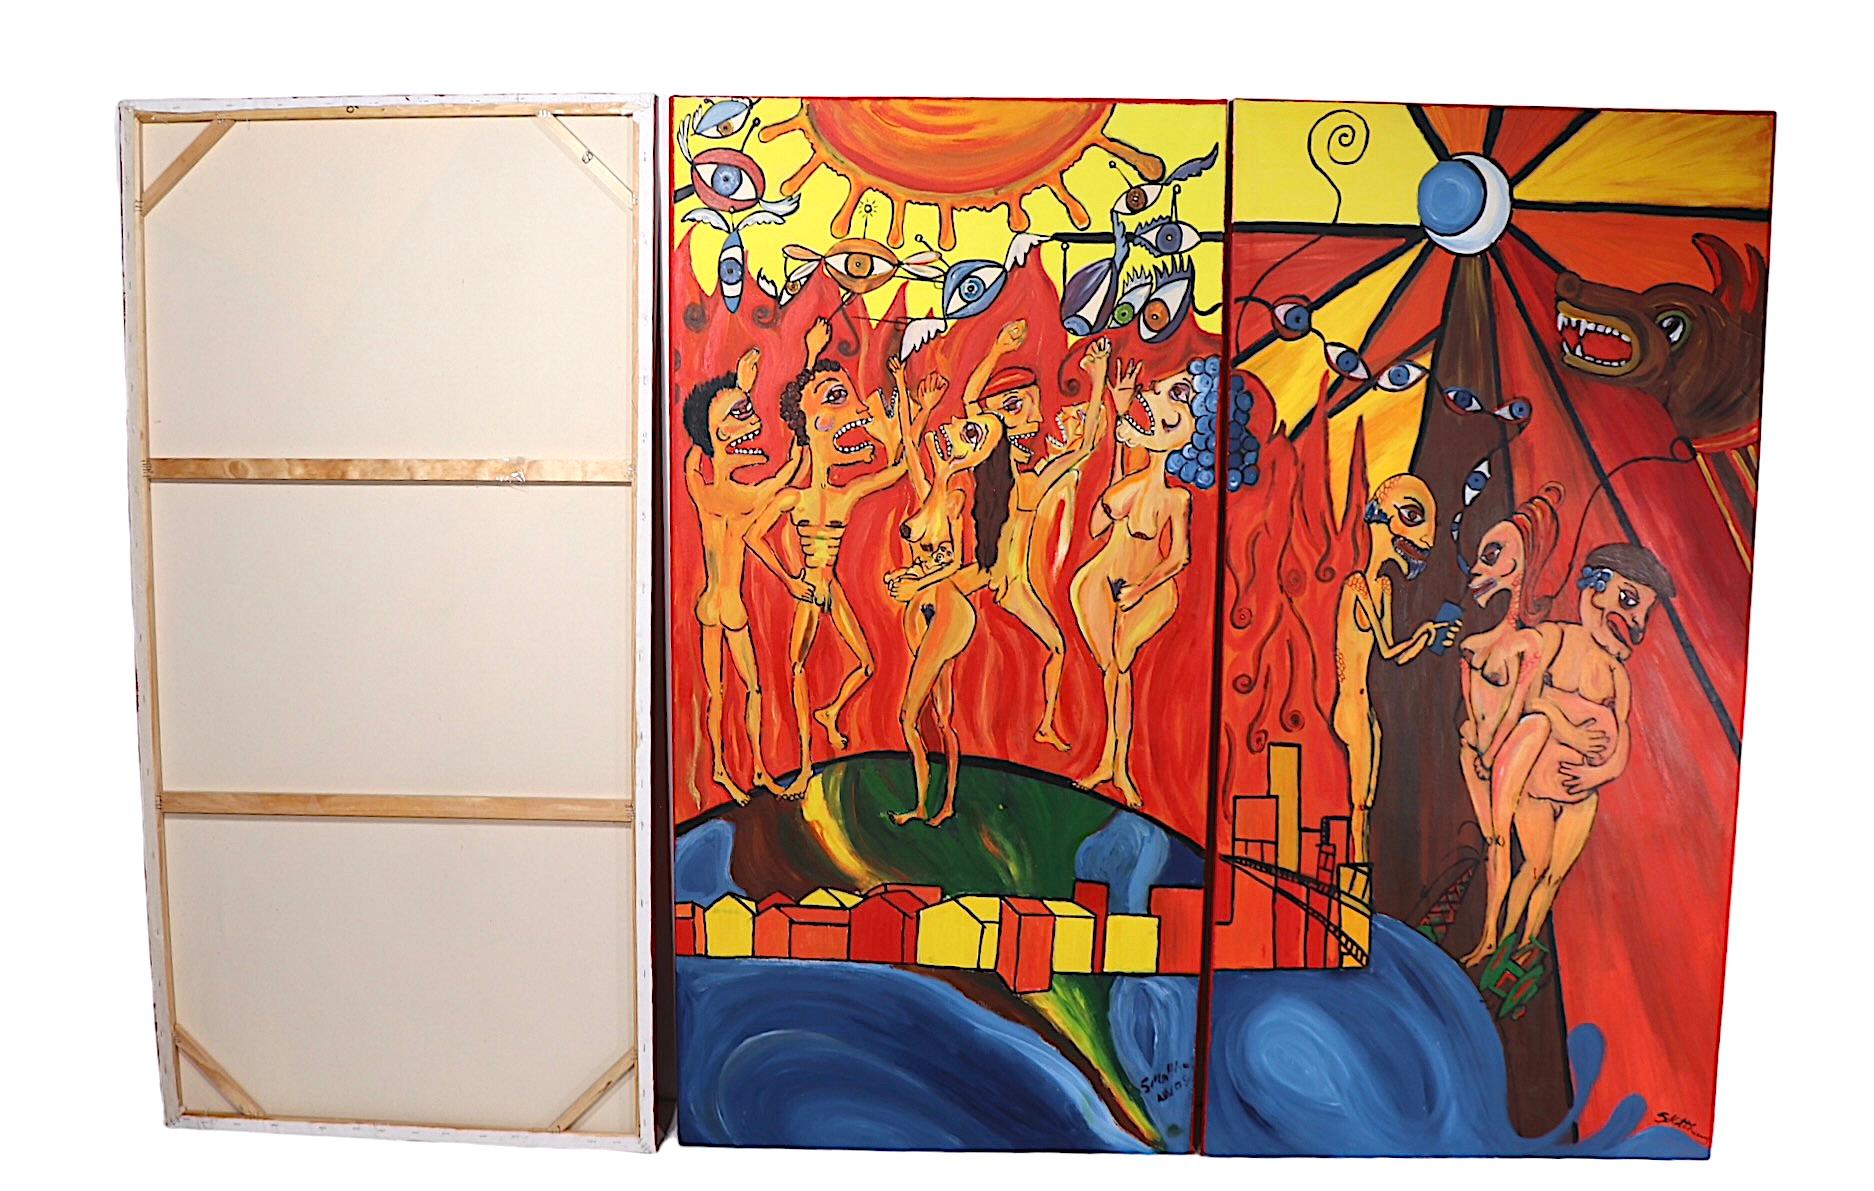 Post Modern, Fantasy, Street Style painting(s) depicting a gathering of figures, perhaps in a ritual, worship  or dance activity. The piece consists of three panels, each 31.5 inches W x 63 Inches H x 1 inch D., when assembled into the triptych